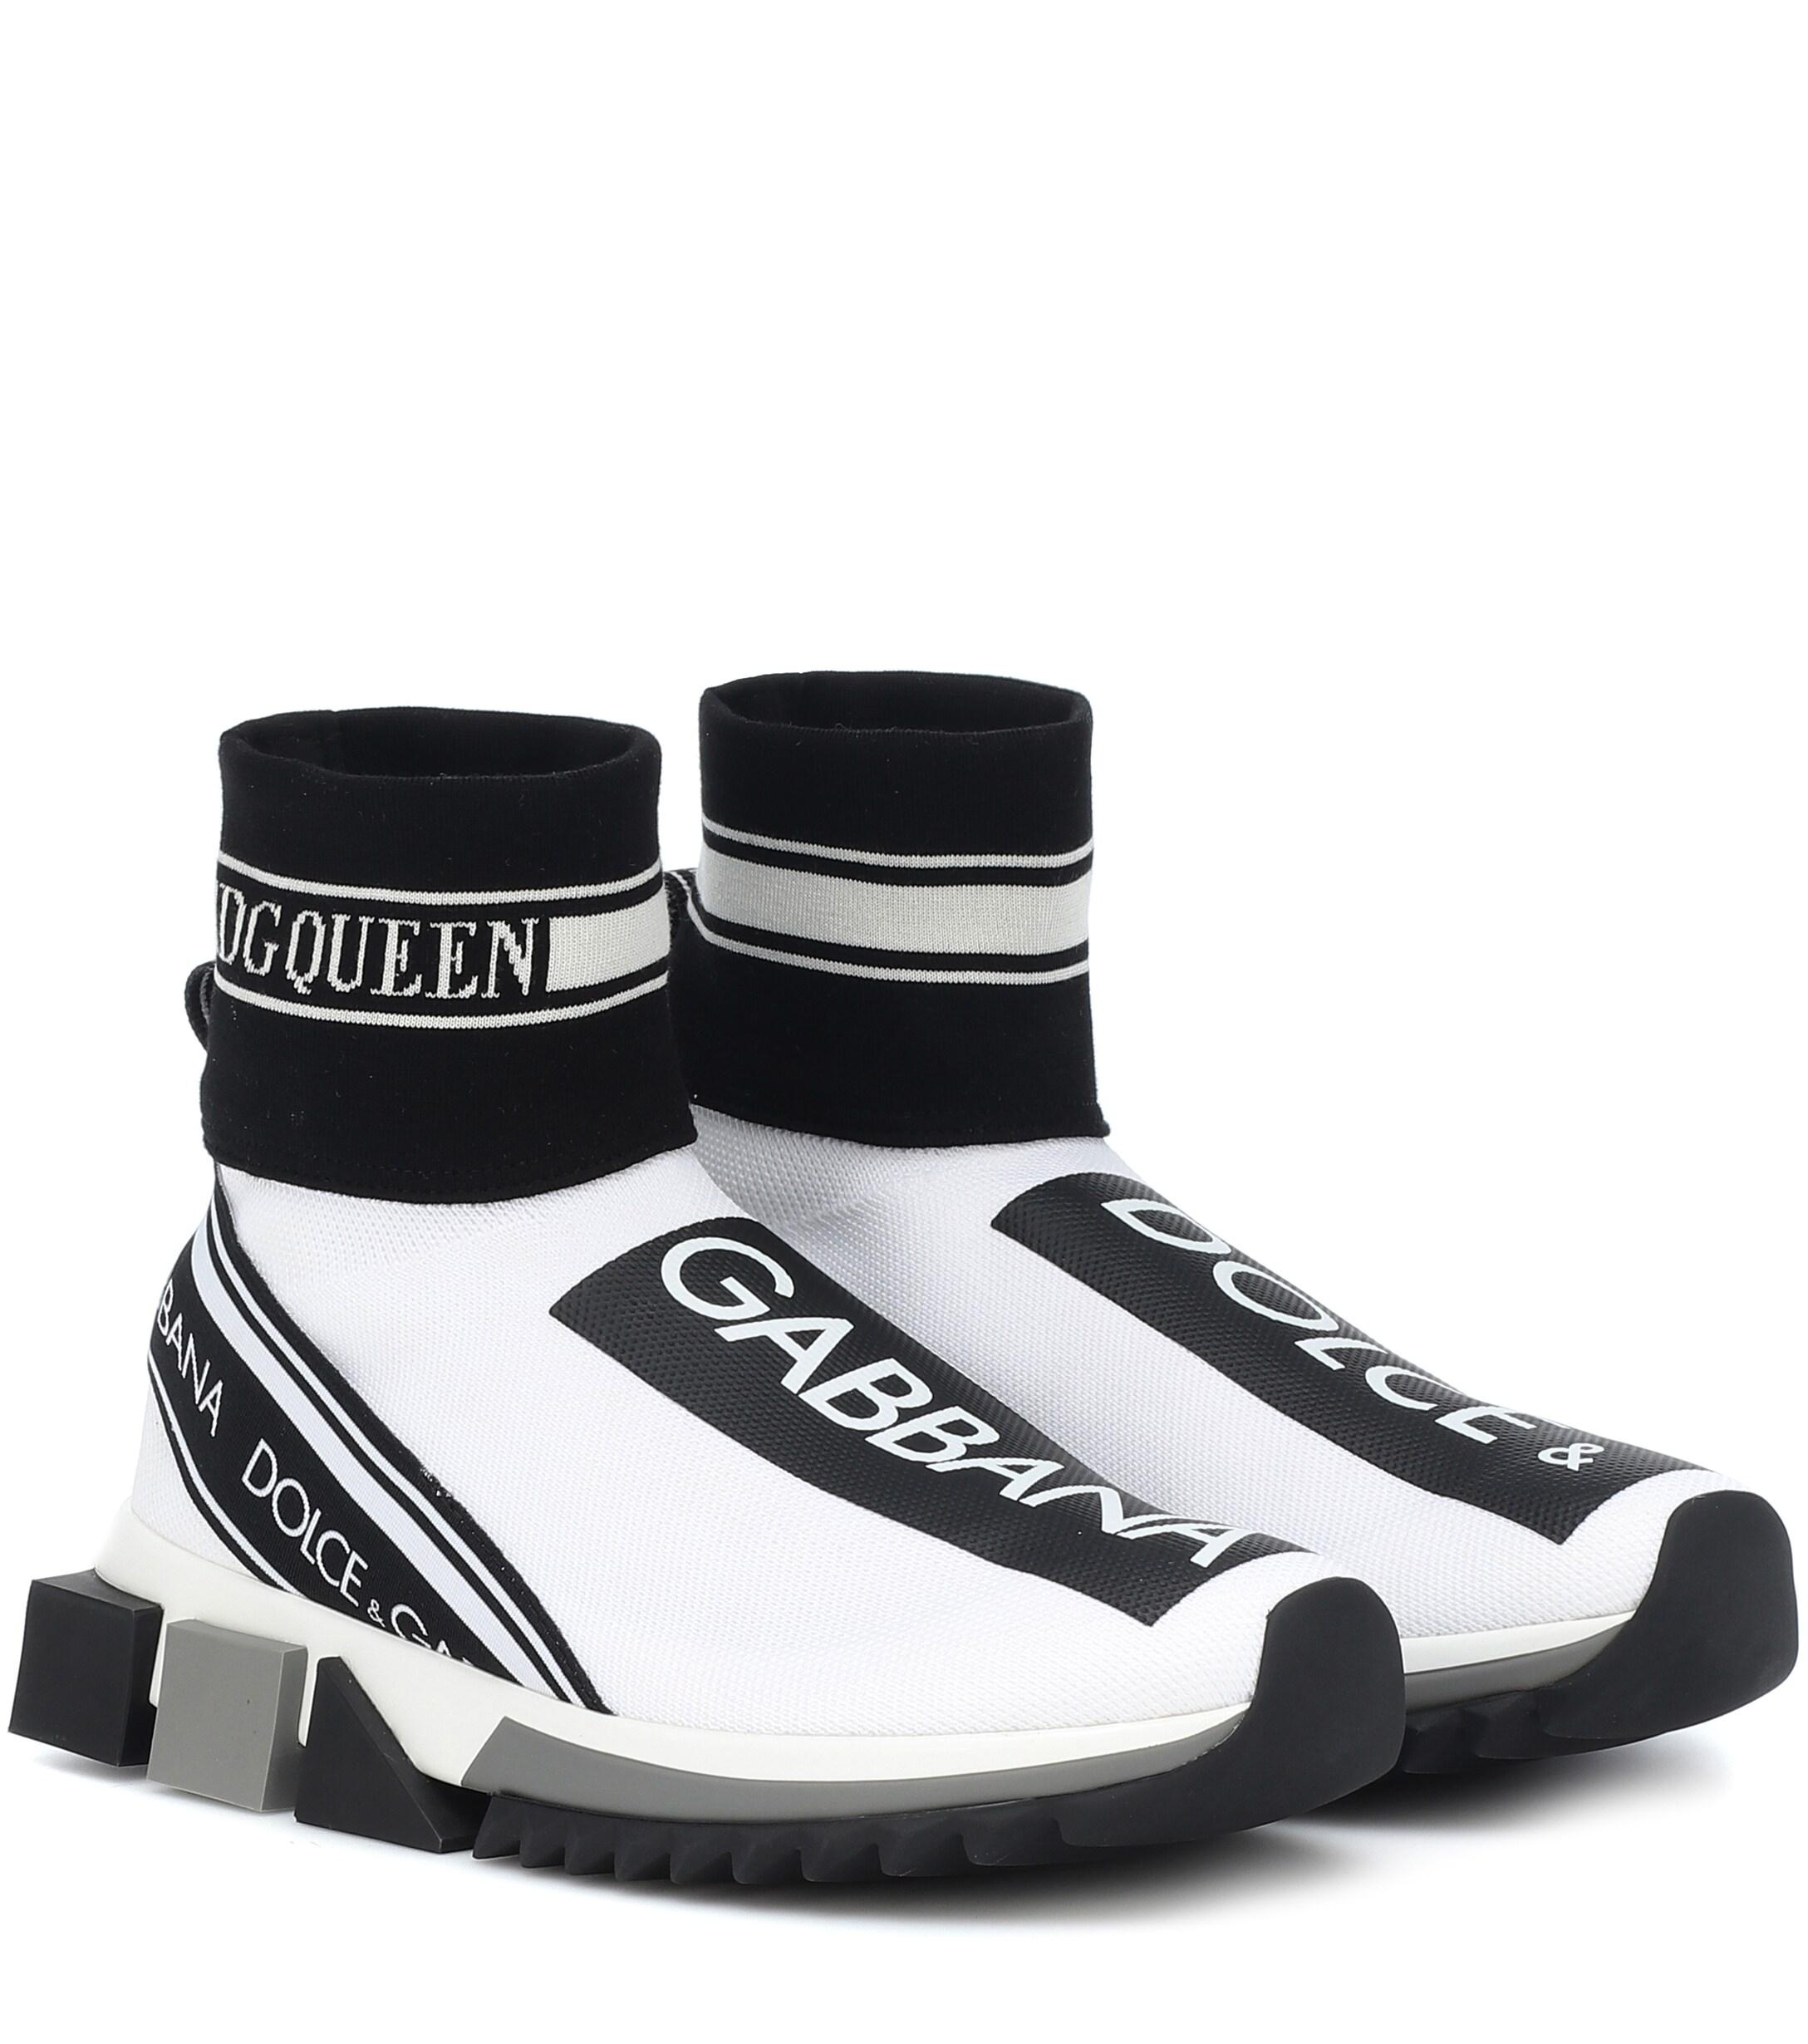 Dolce & Gabbana Sorrento High Top Sneakers in White - Lyst